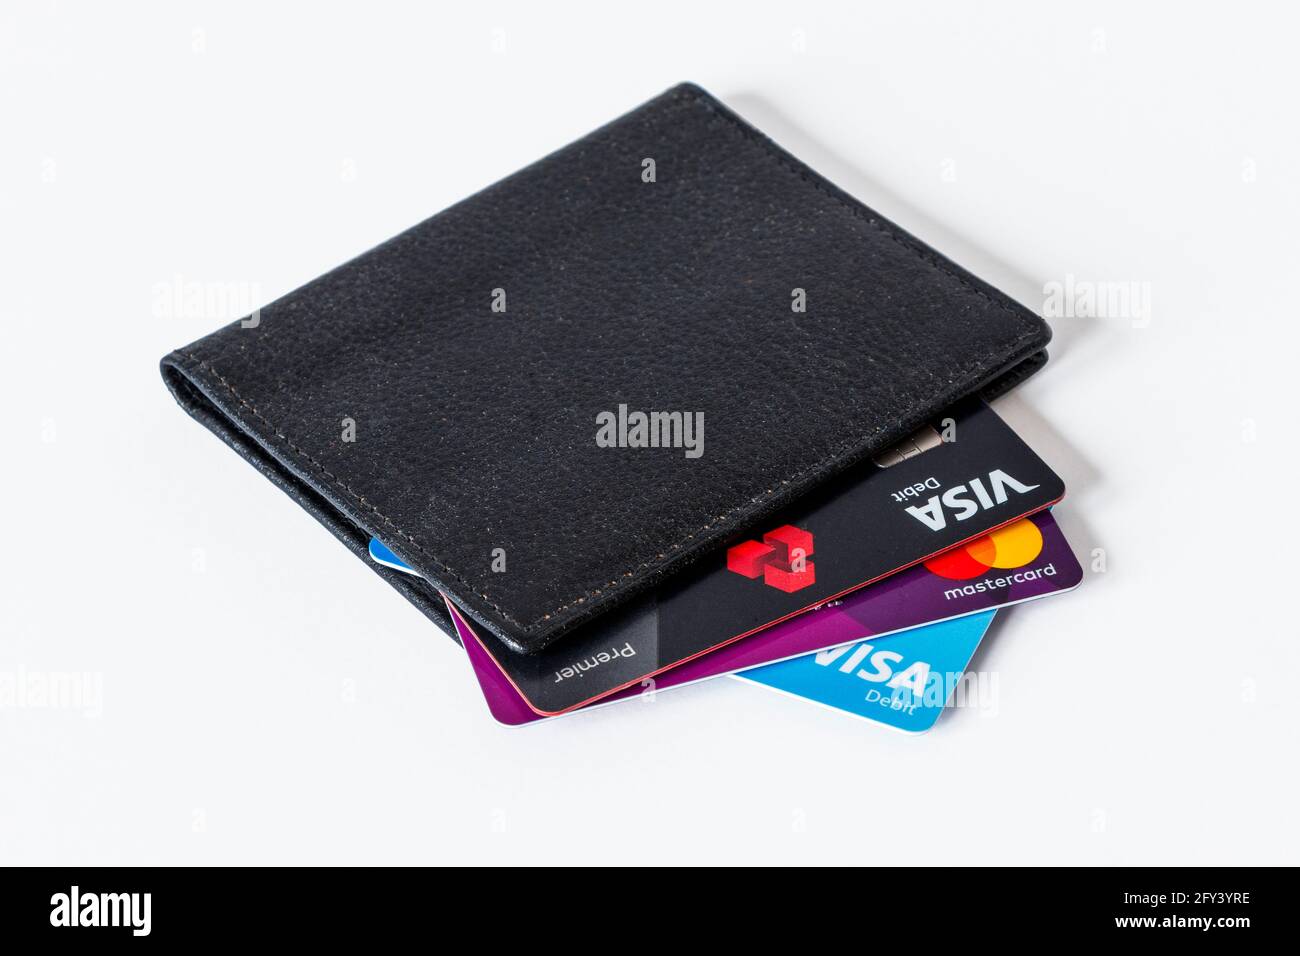 A black leather card holder with credit and debit cards showing, against a white background Stock Photo